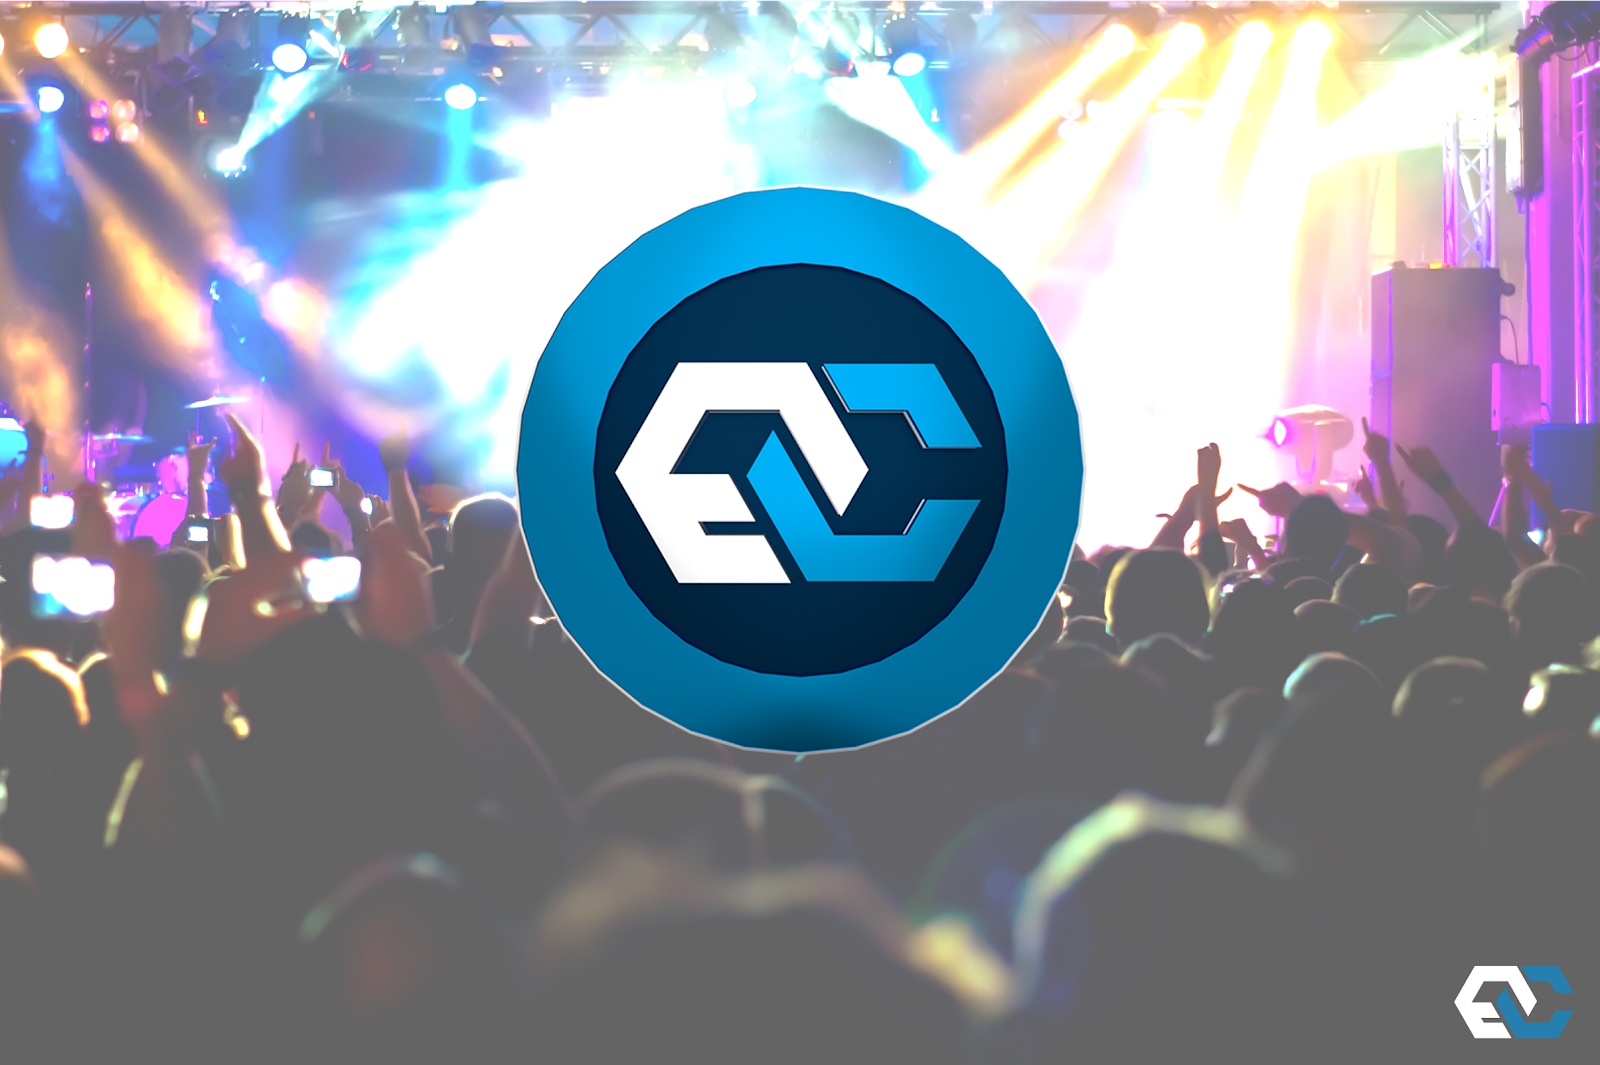 EventChain image for the New Listing at Btcpop: EventChain article